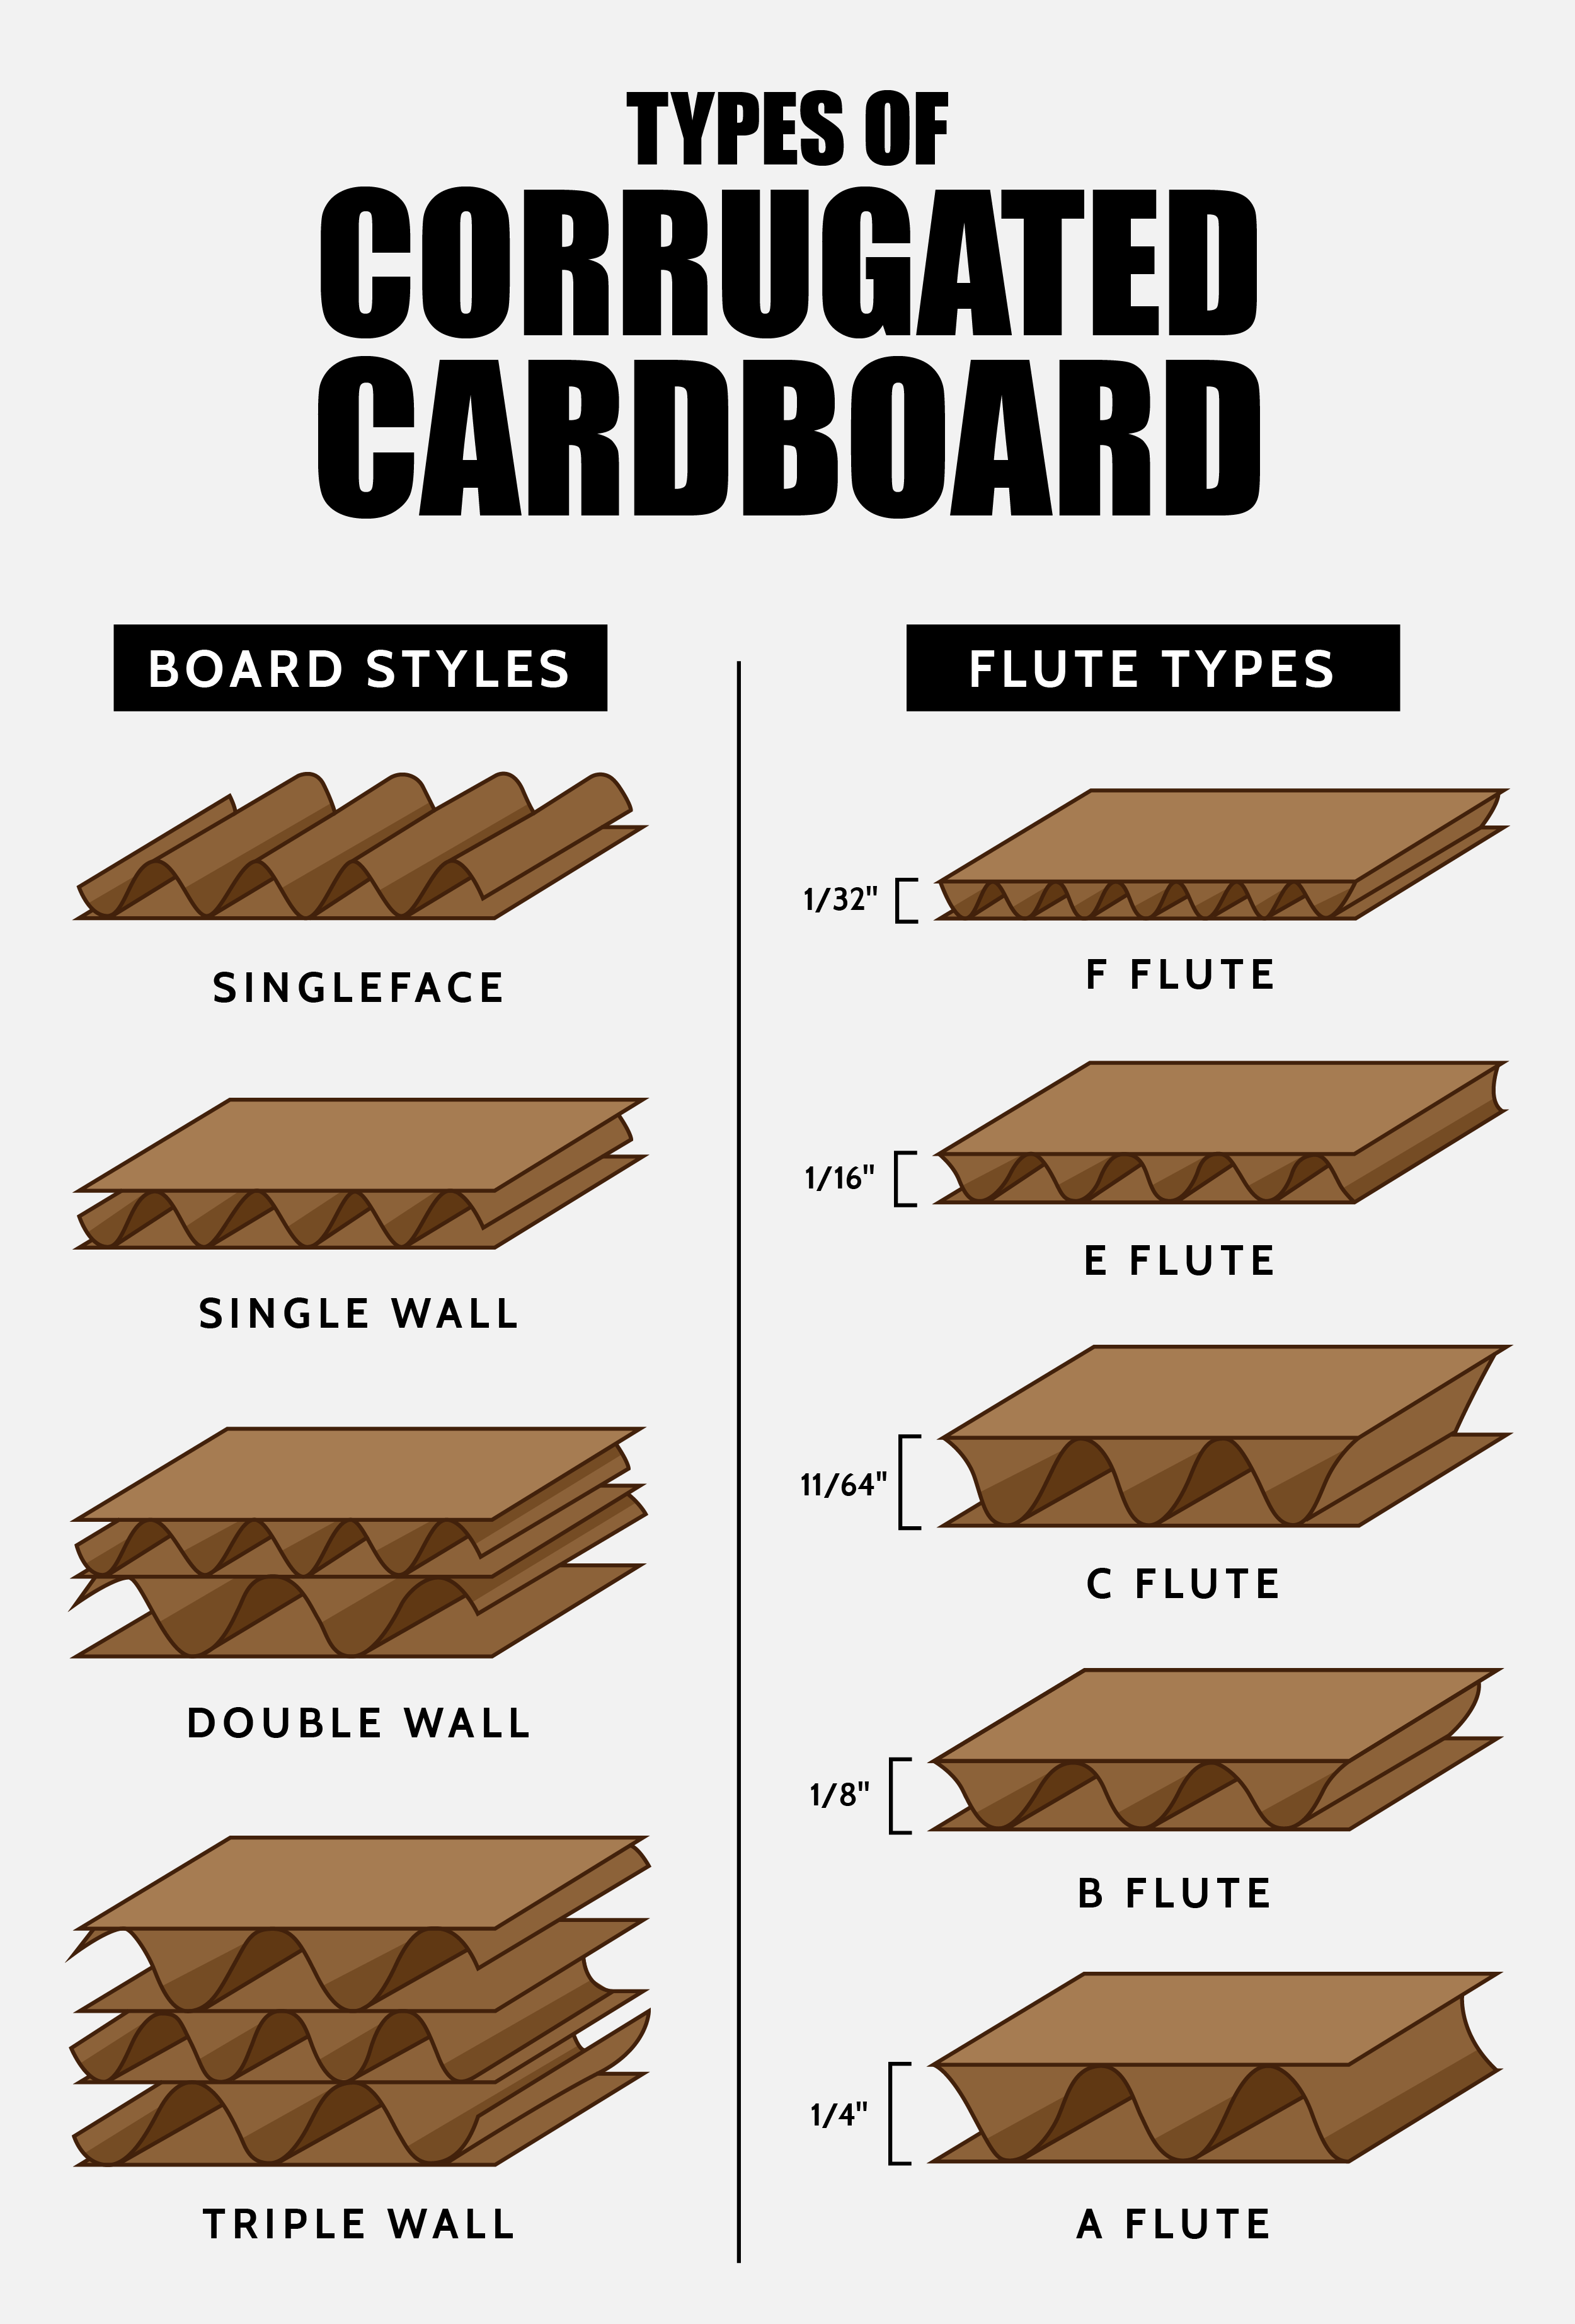 Types of Corrugated Cardboard Infographic